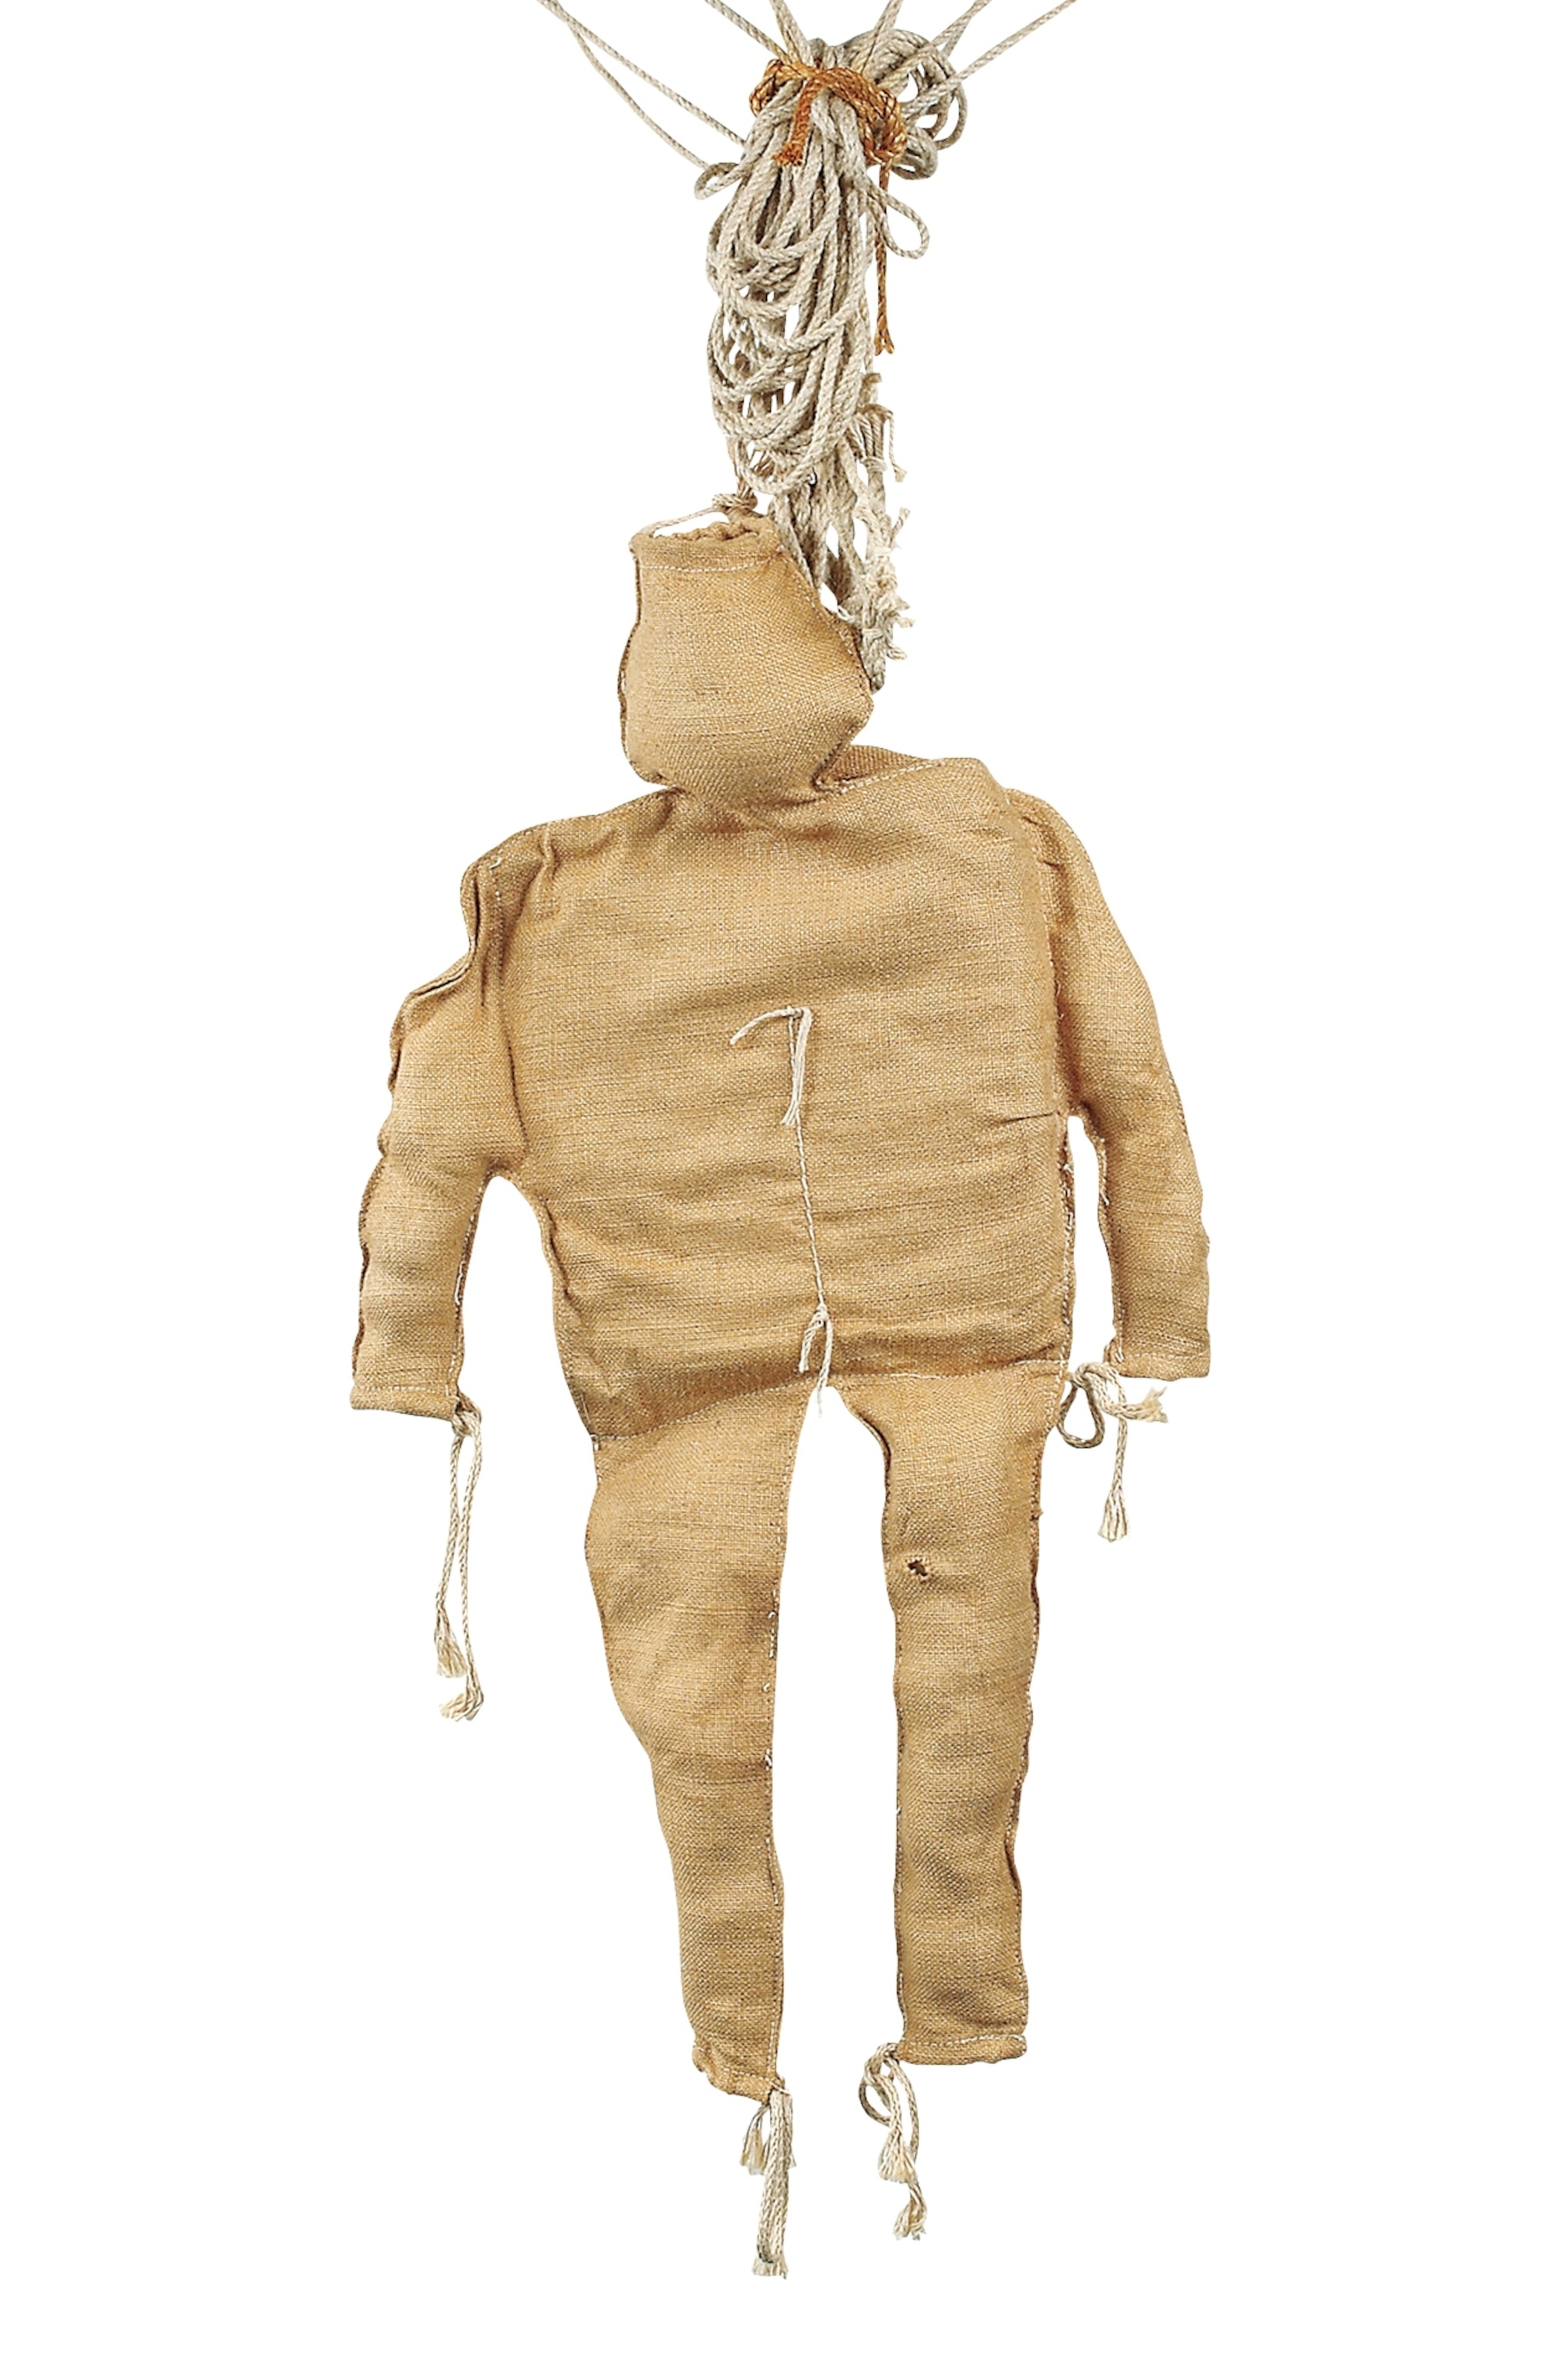 a straw dummy, dropped by parachute, used as a tactical deception